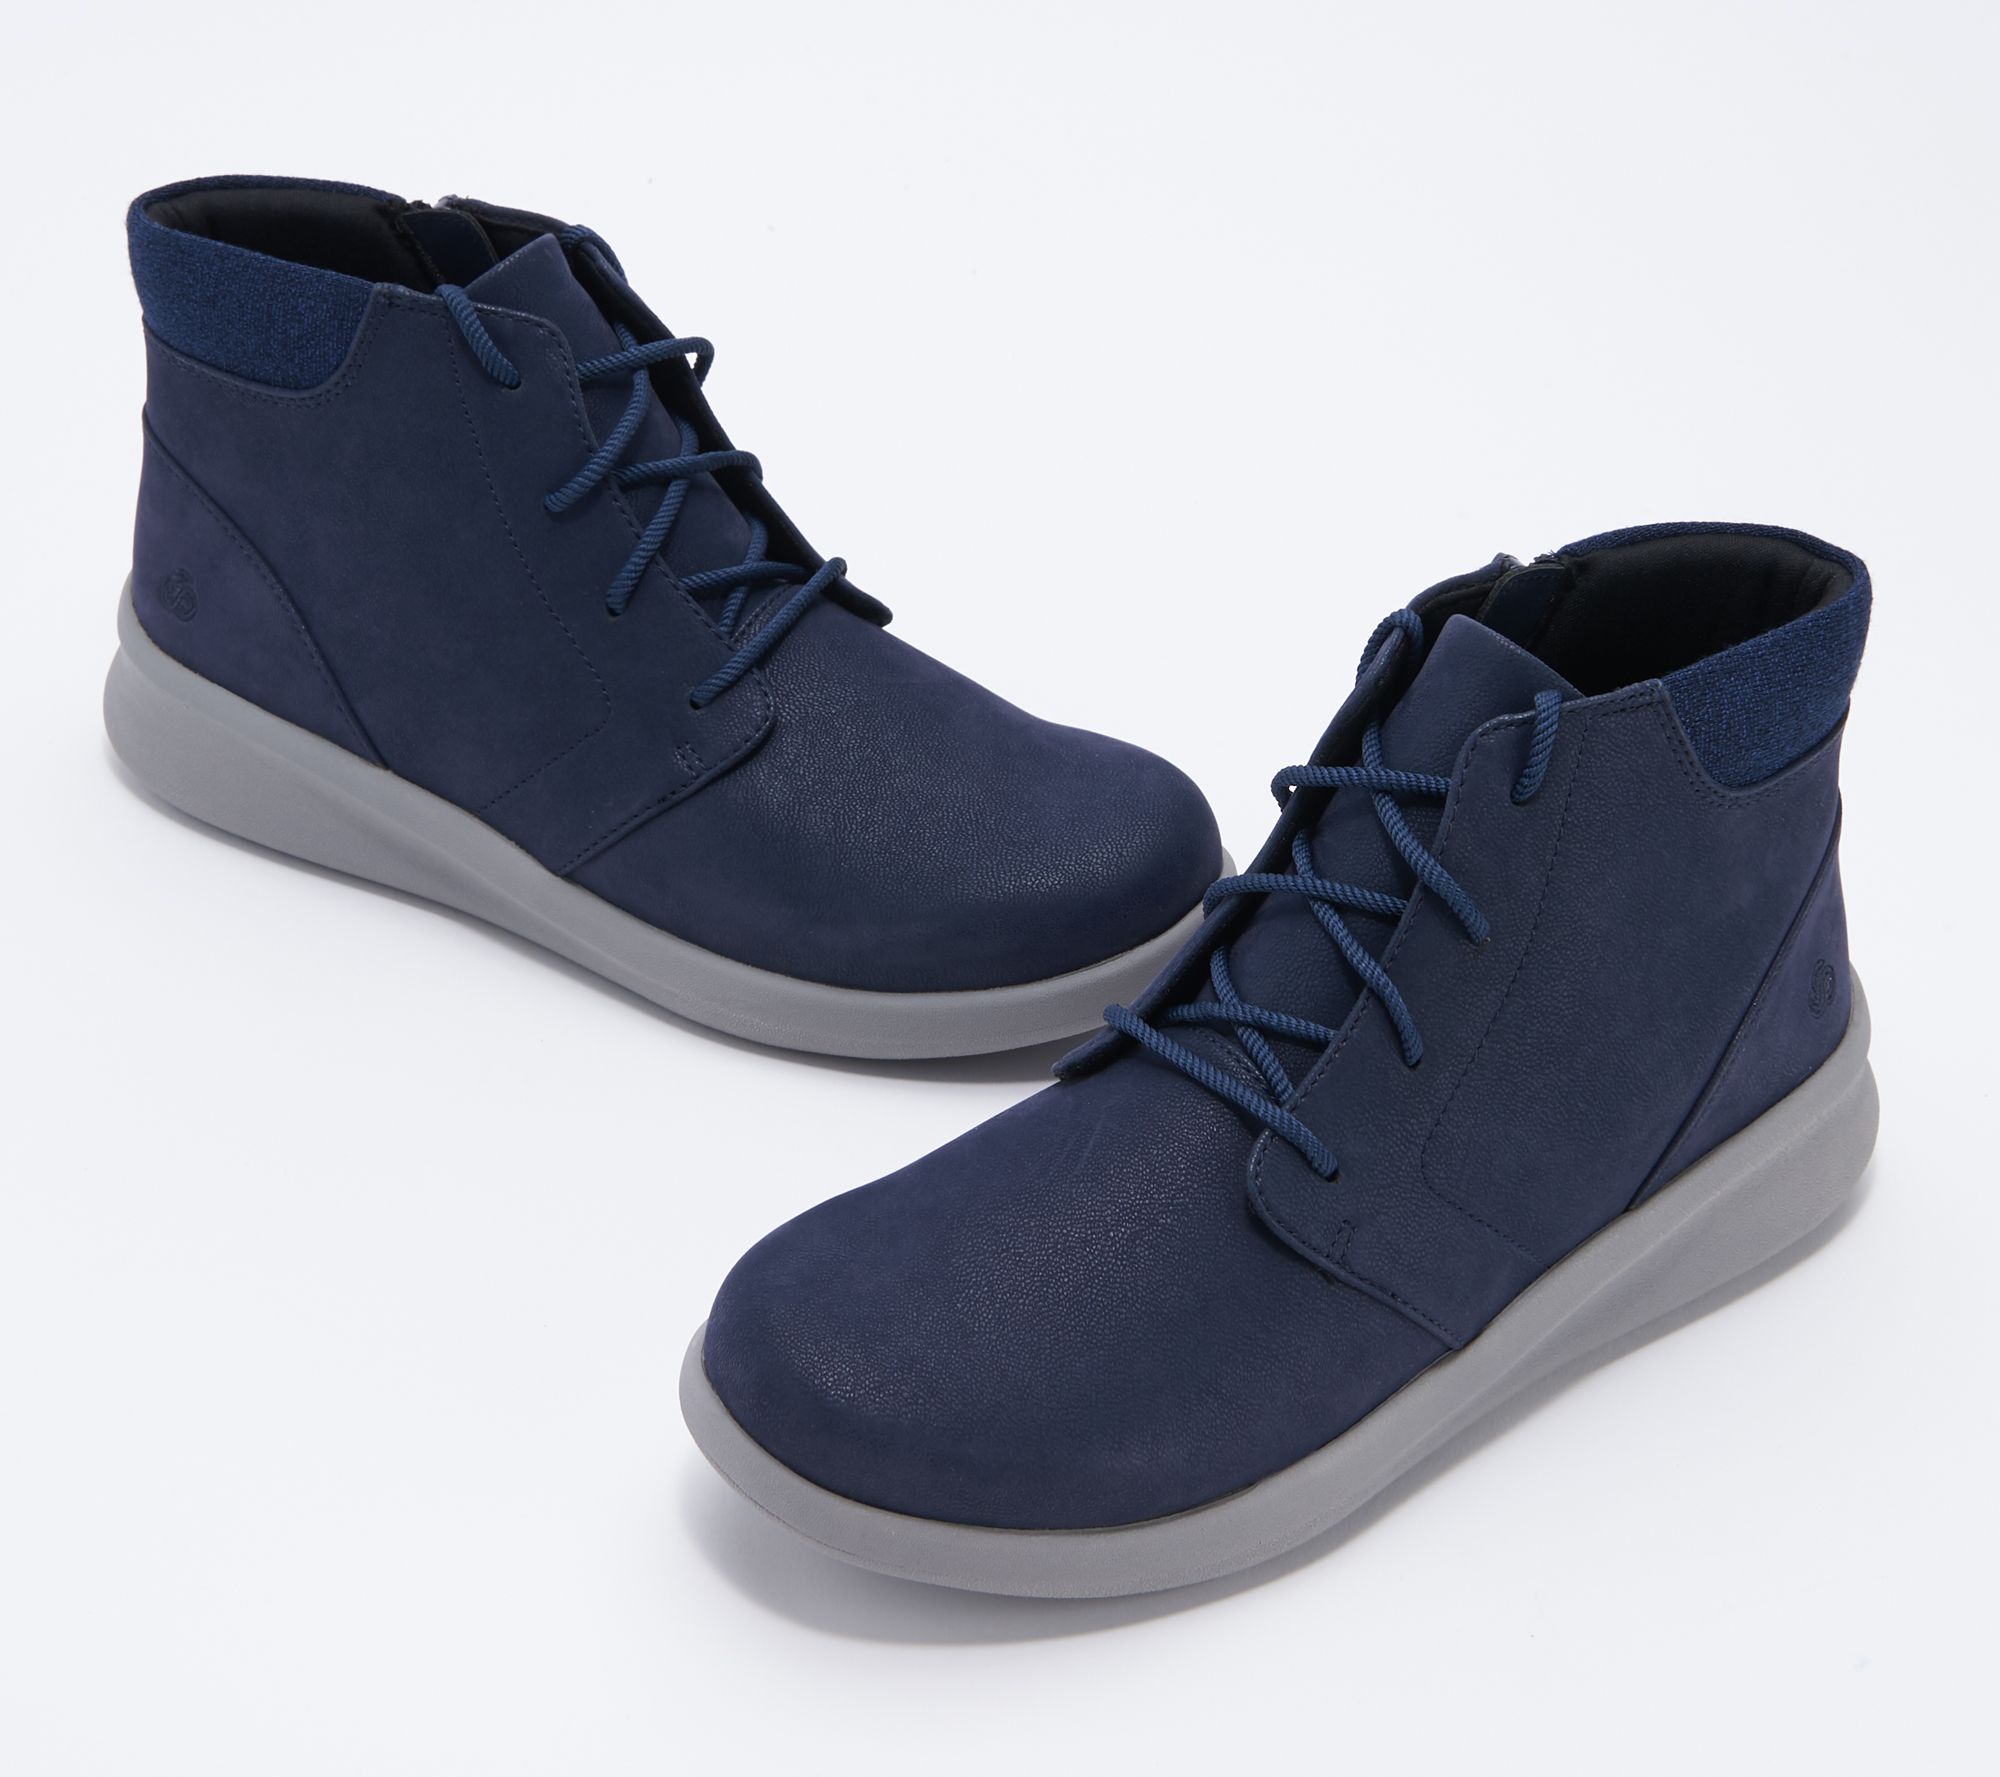 clarks lace up ankle boots